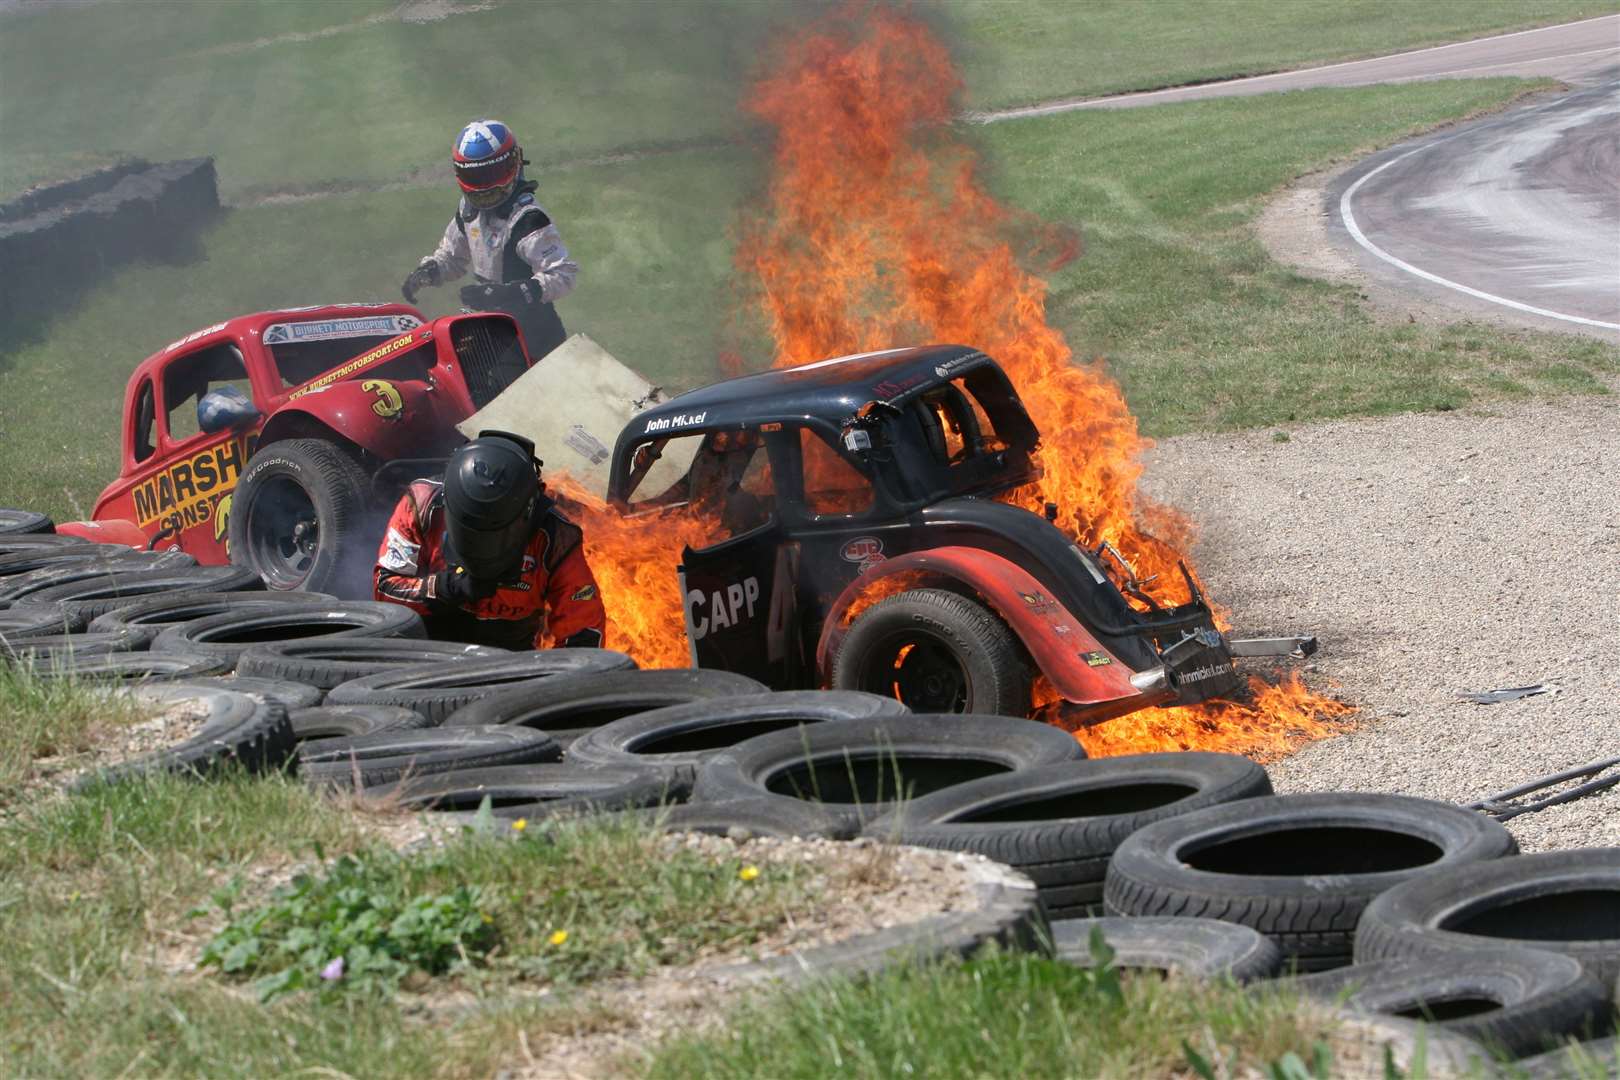 Two Legends drivers - Ross Marshall and John Mickel - were lucky to escape from this fiery crash at Lydden Hill in June 2010. Picture: Kerry Dunlop